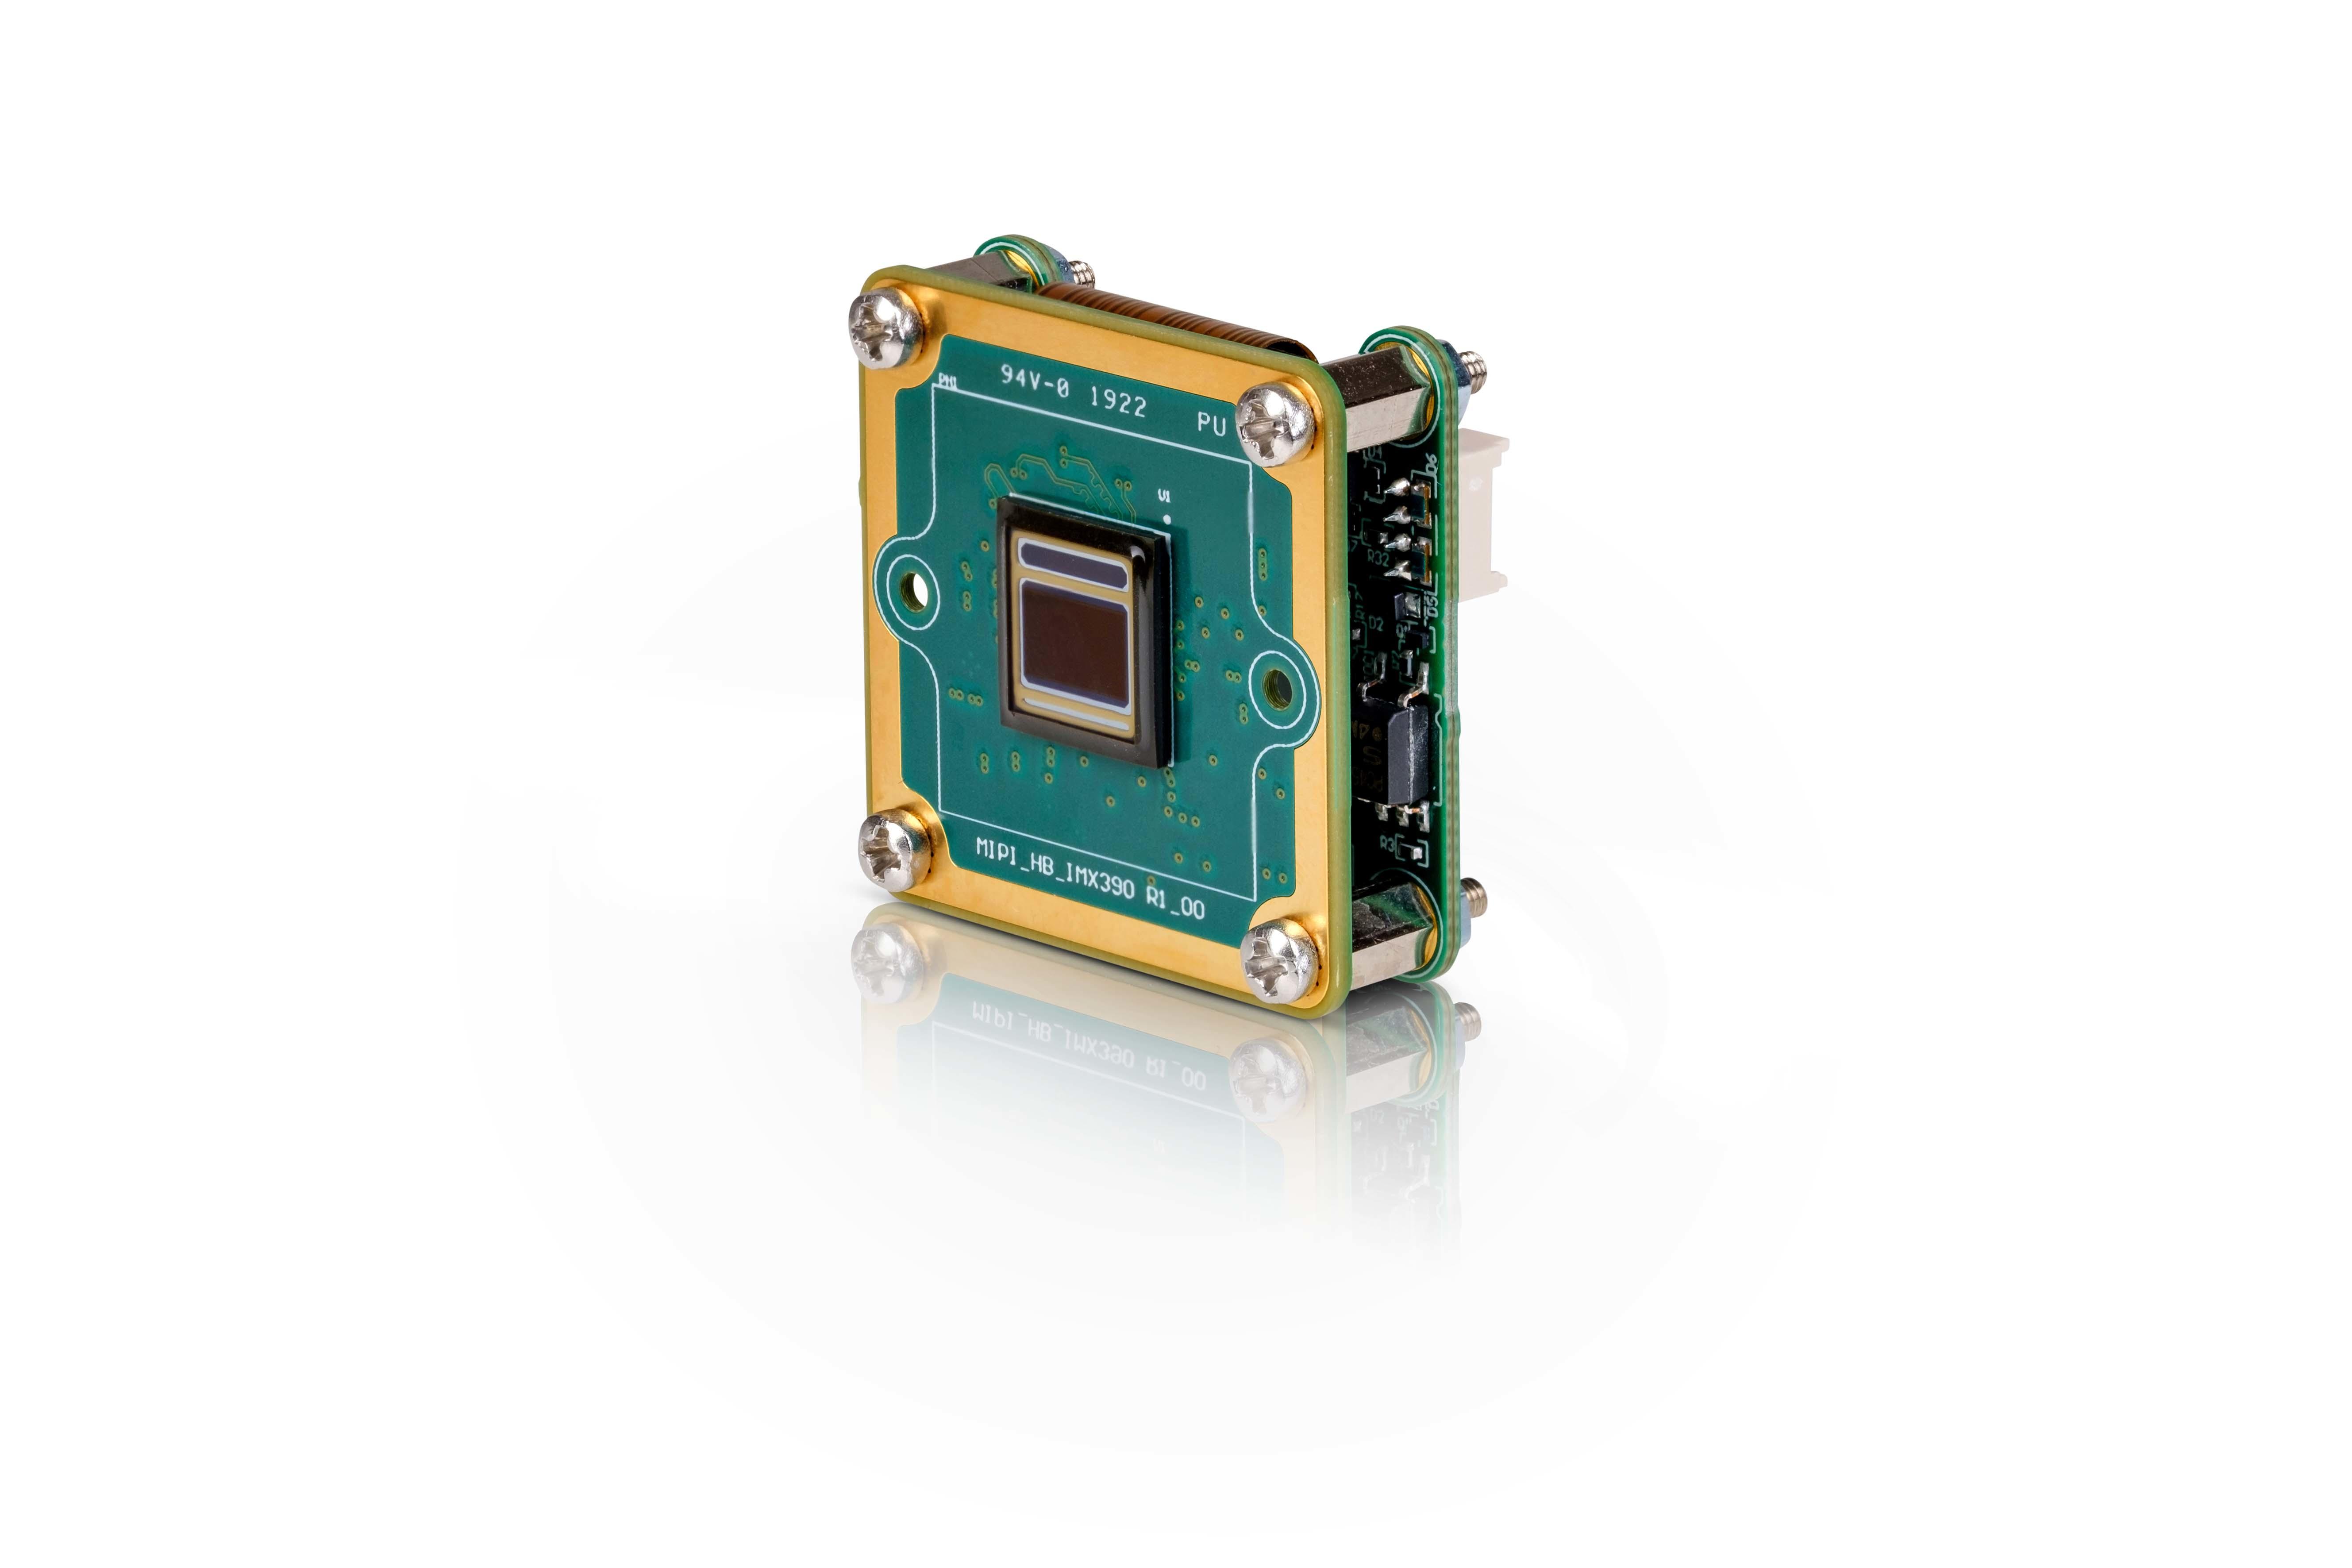 The Imaging Source, 5MP 1/2.8" IMX335, Embedded Board Camera